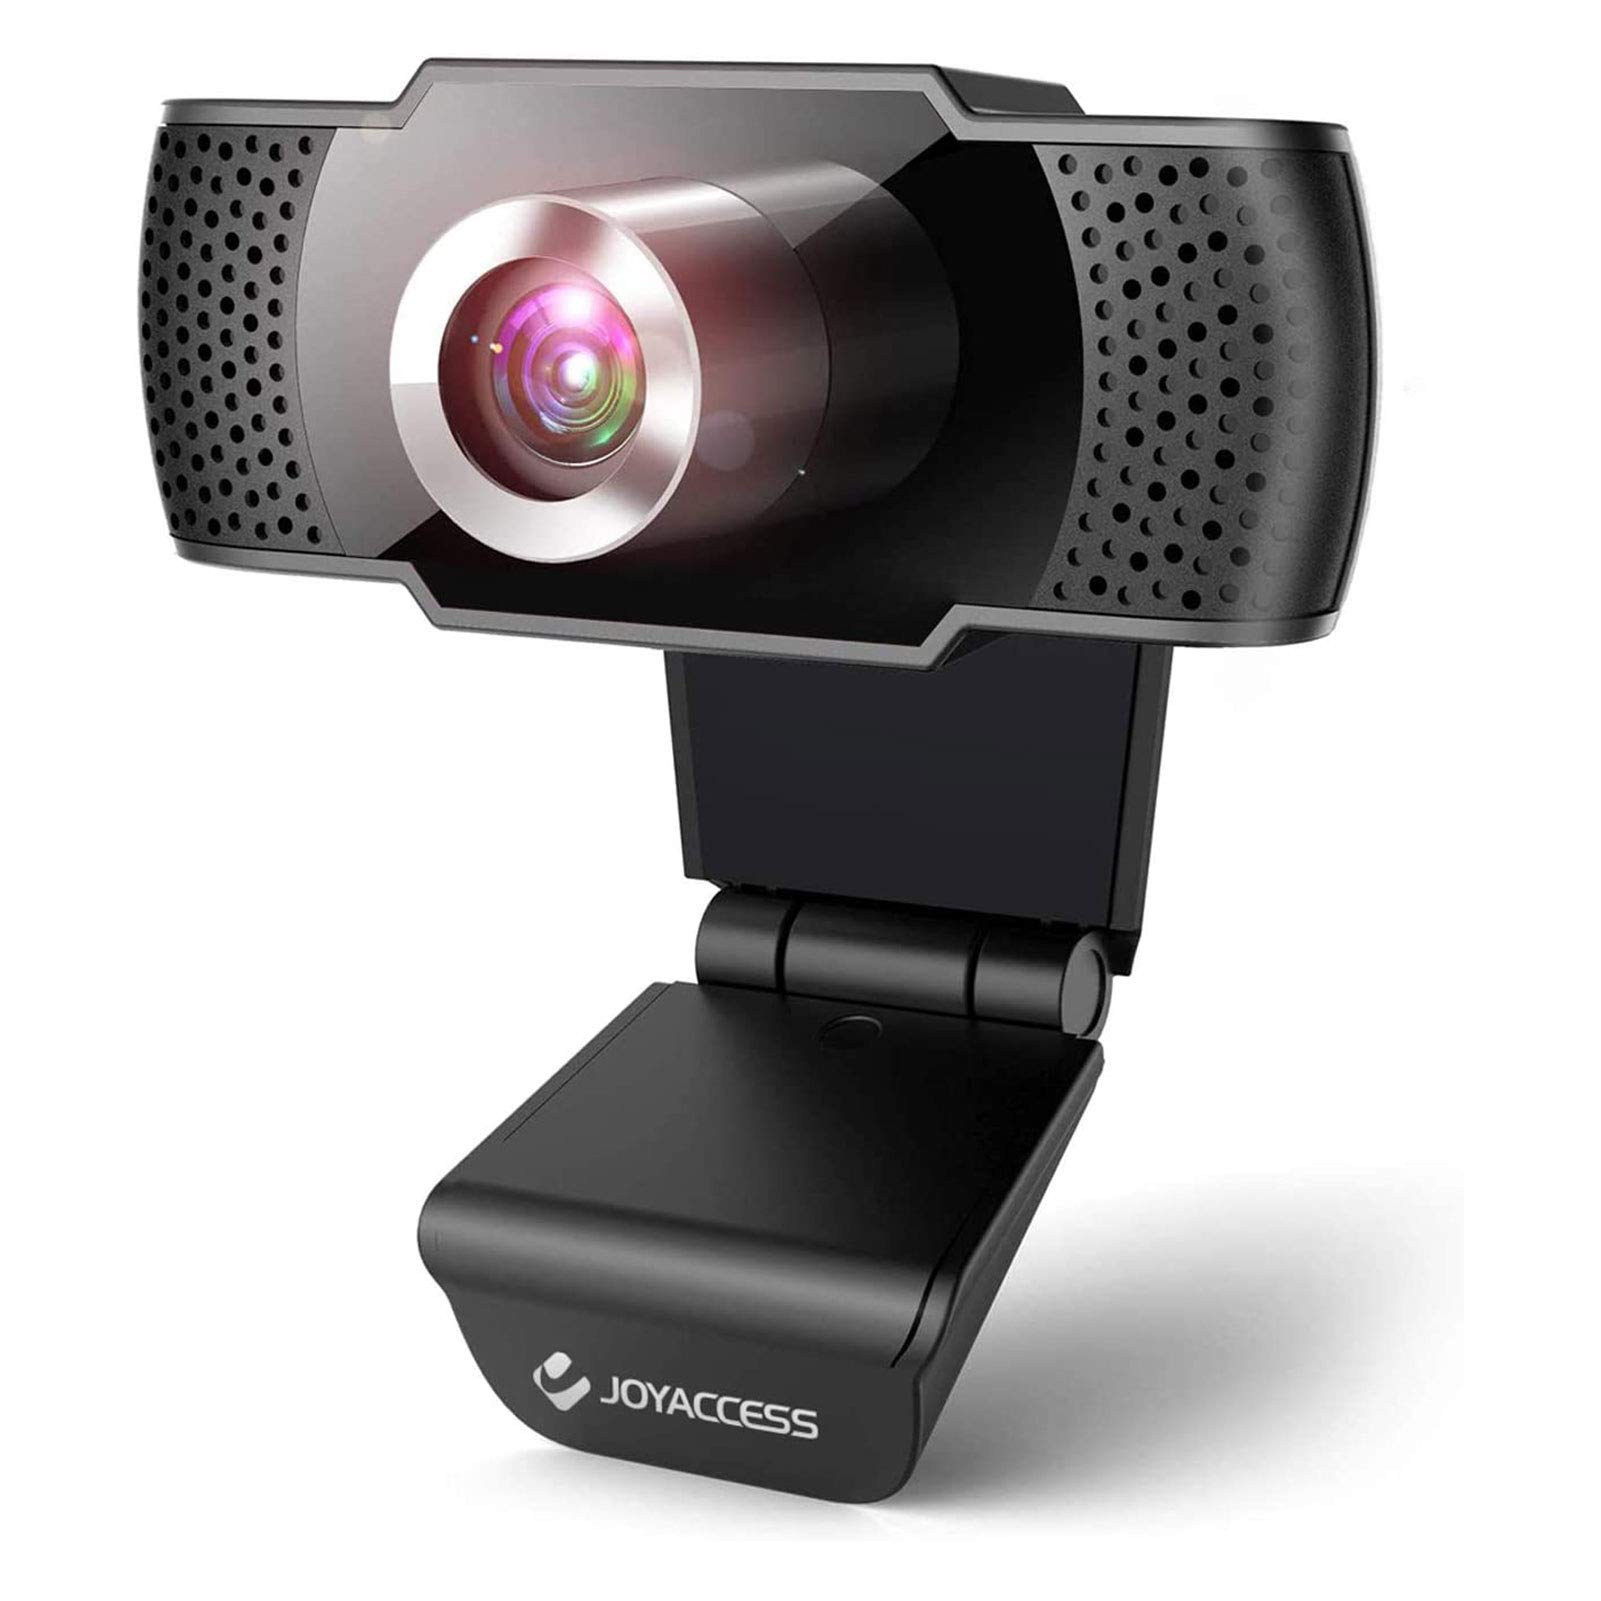 Webcam 1080P Full HD, Webcam with Microphone for PC, USB 2.0 Web Camera, Webcam for Video Calls, Plug and Play, Recording, Studying, Game and Conferencing on Zoom/YouTube and skypeWebcam 1080P Full HD, Webcam with Microphone for PC, USB 2.0 Web Camera, Webcam for Video Calls, Plug and Play, Recording, Studying, Game and Conferencing on Zoom/YouTube and skype
